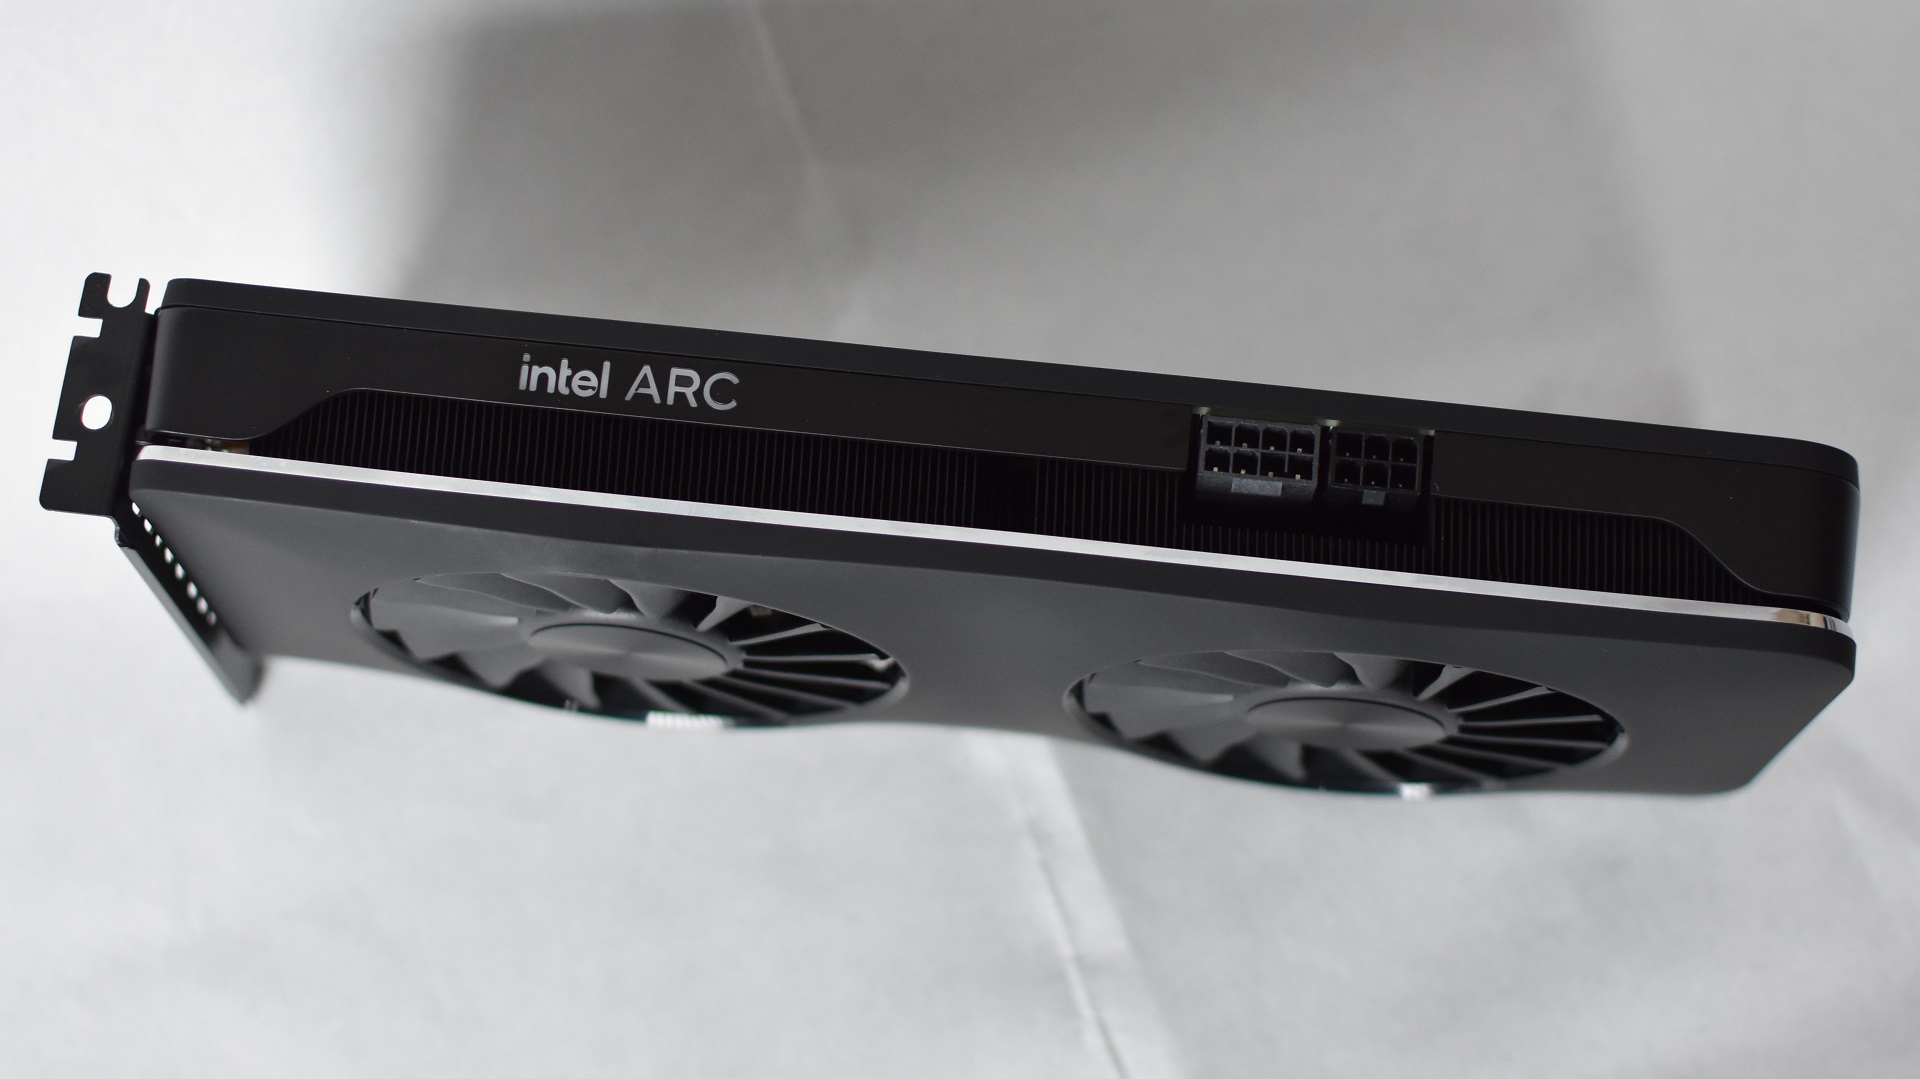 A side view of the Intel Arc A750 Limited Edition graphics card, showing its power connectors.